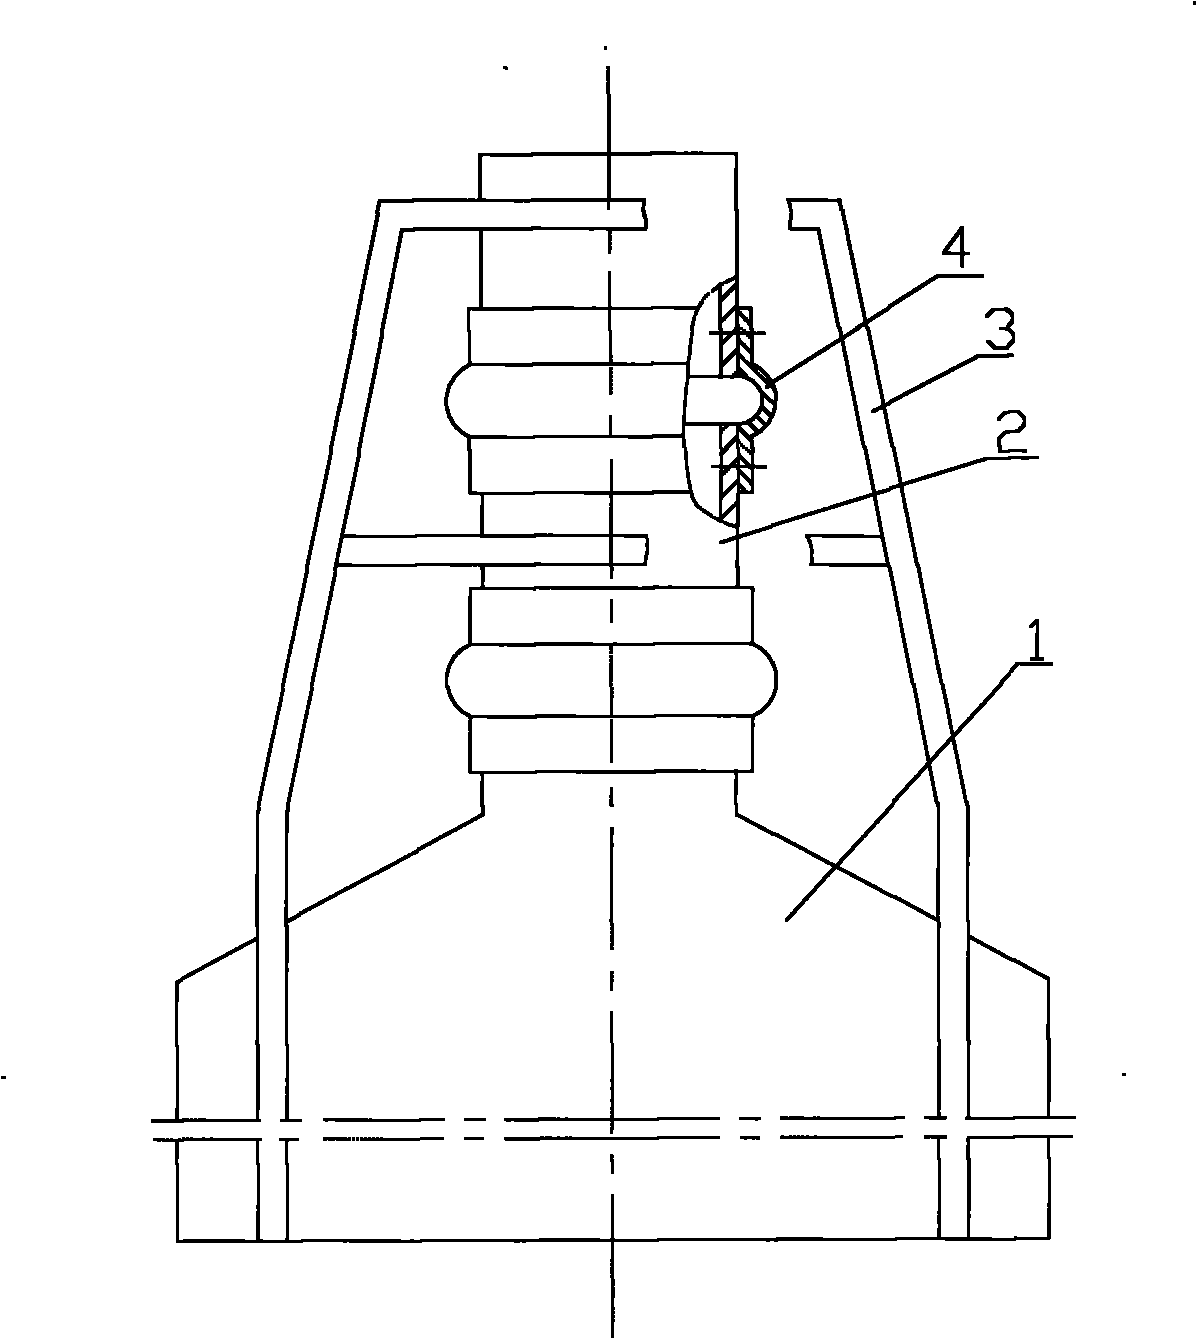 Combination body of flue gas desulfurization absorption tower and chimney